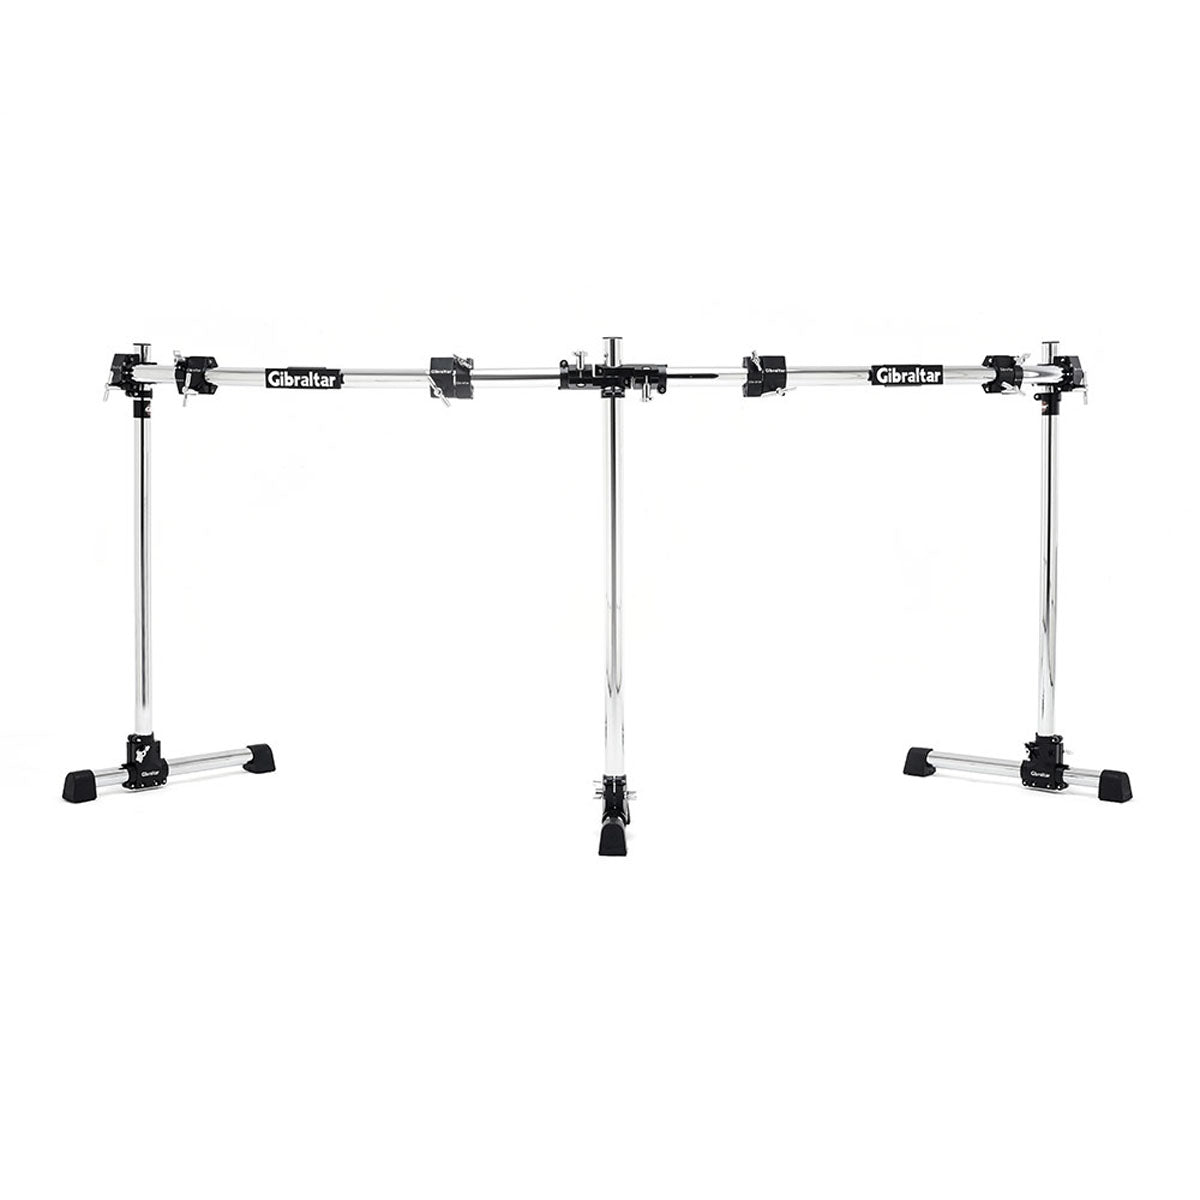 Gibraltar GRS-850BDL Road Series Curved Double Rack System